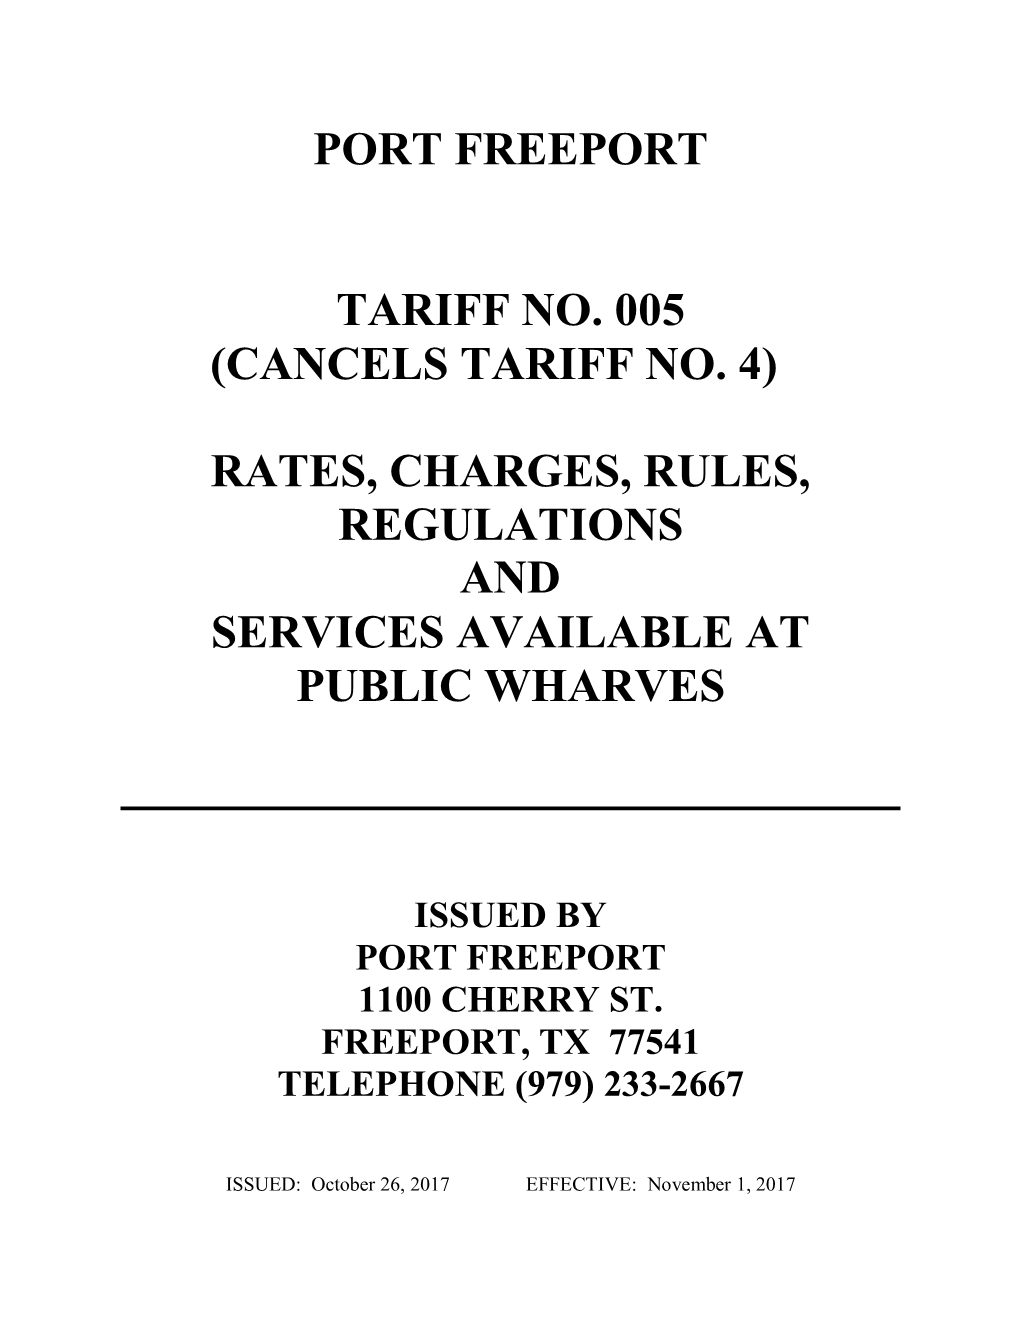 (Cancels Tariff No. 4) Rates, Charges, Rules, Regulations